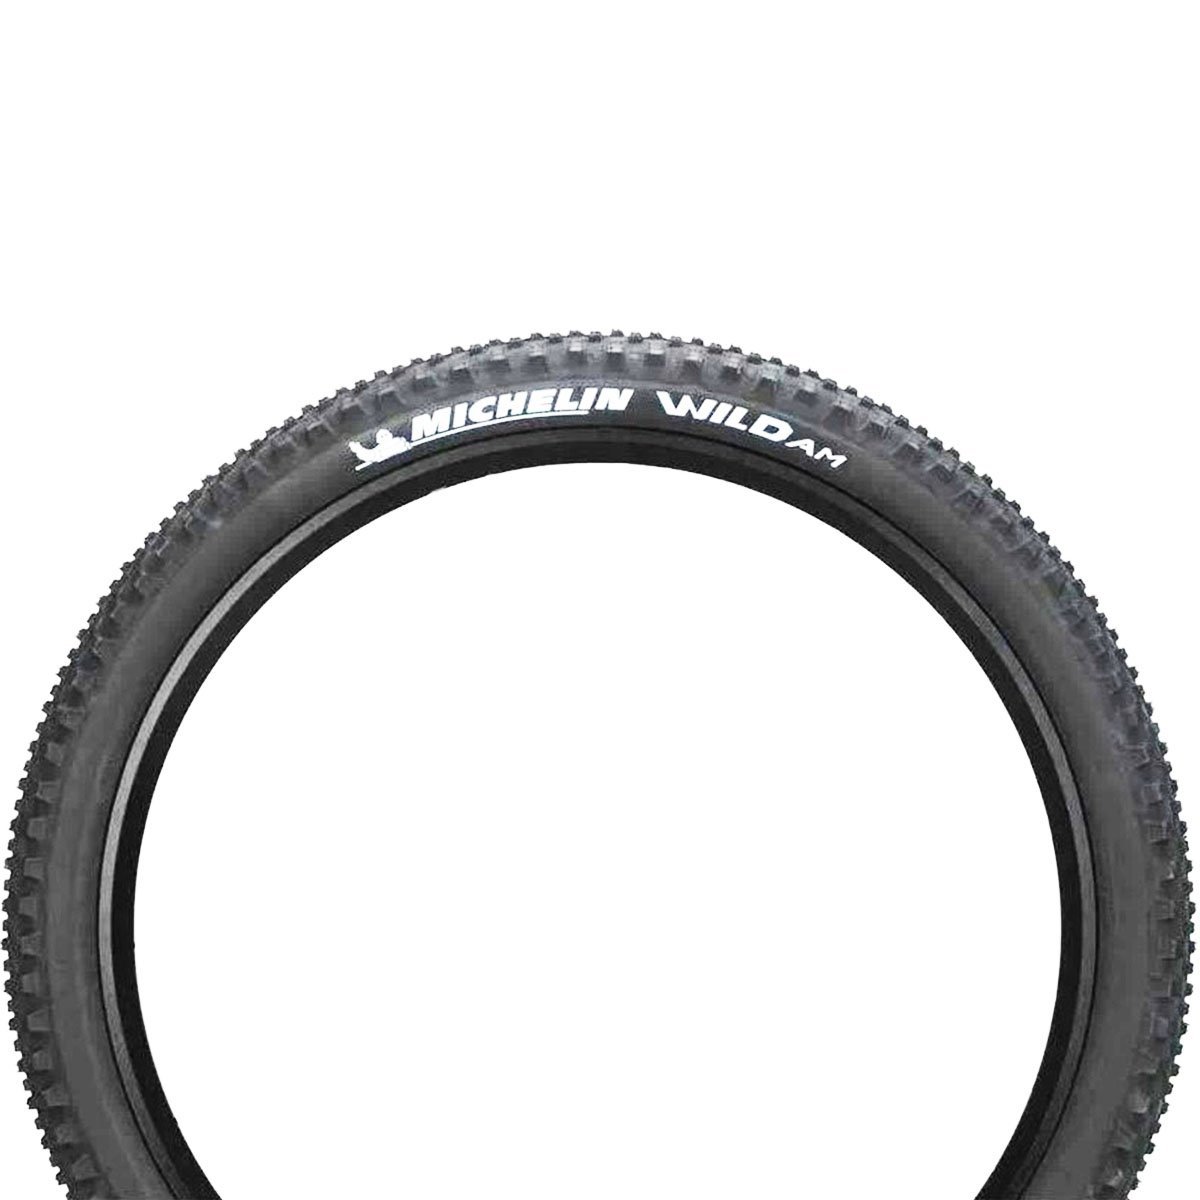 PNEU MICHELIN 29X2.35 WILD AM COMPETITION 3X60TPI KEVLAR TLR WILD AM COMPETITION LINE - 4